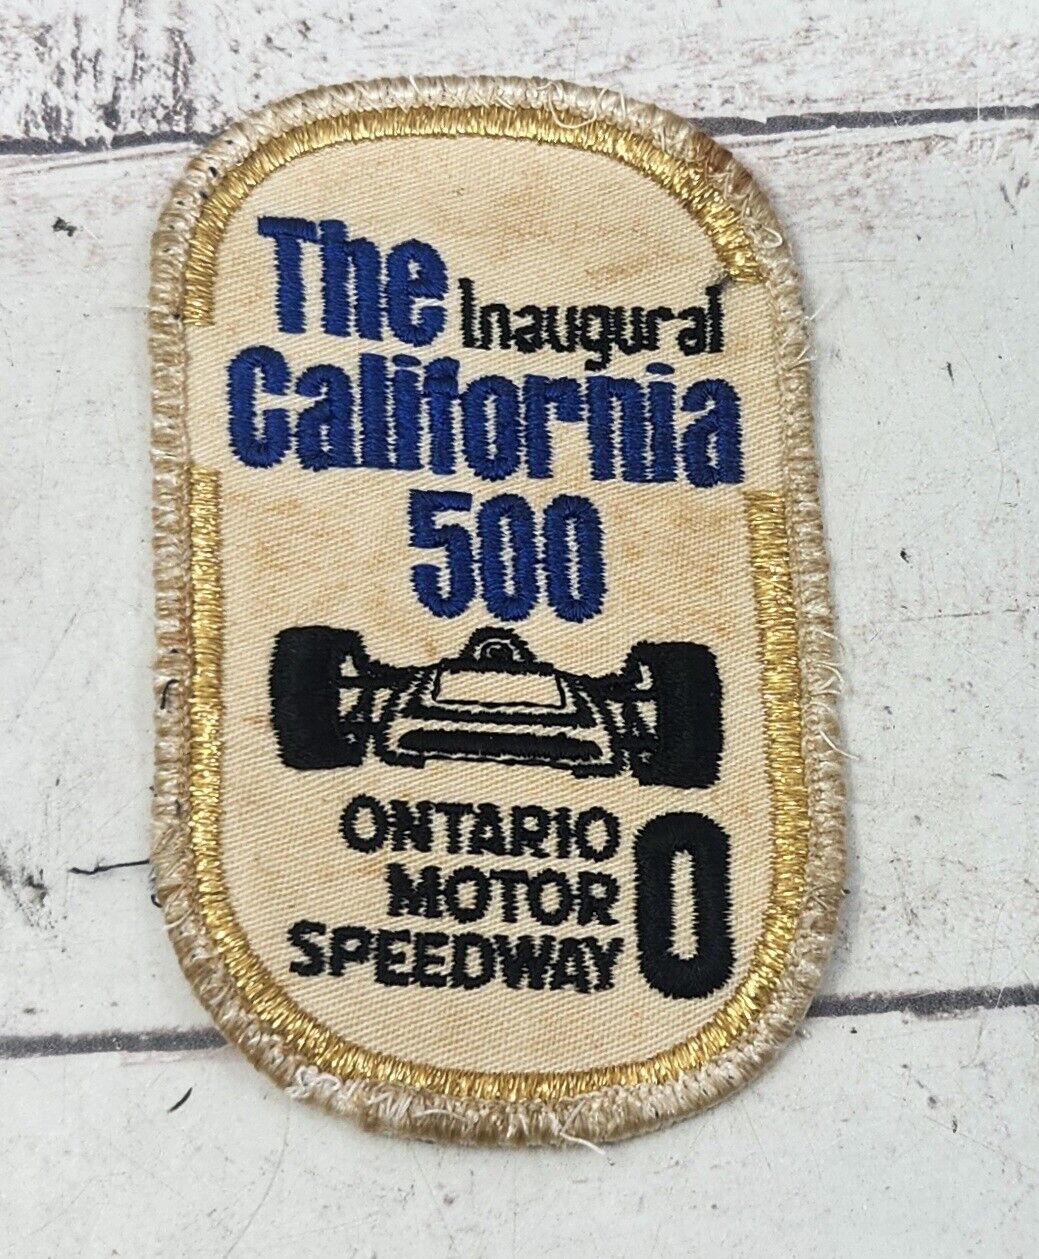 Vintage The California 500 Ontario Motor Speedway Racing Embroidered Patch